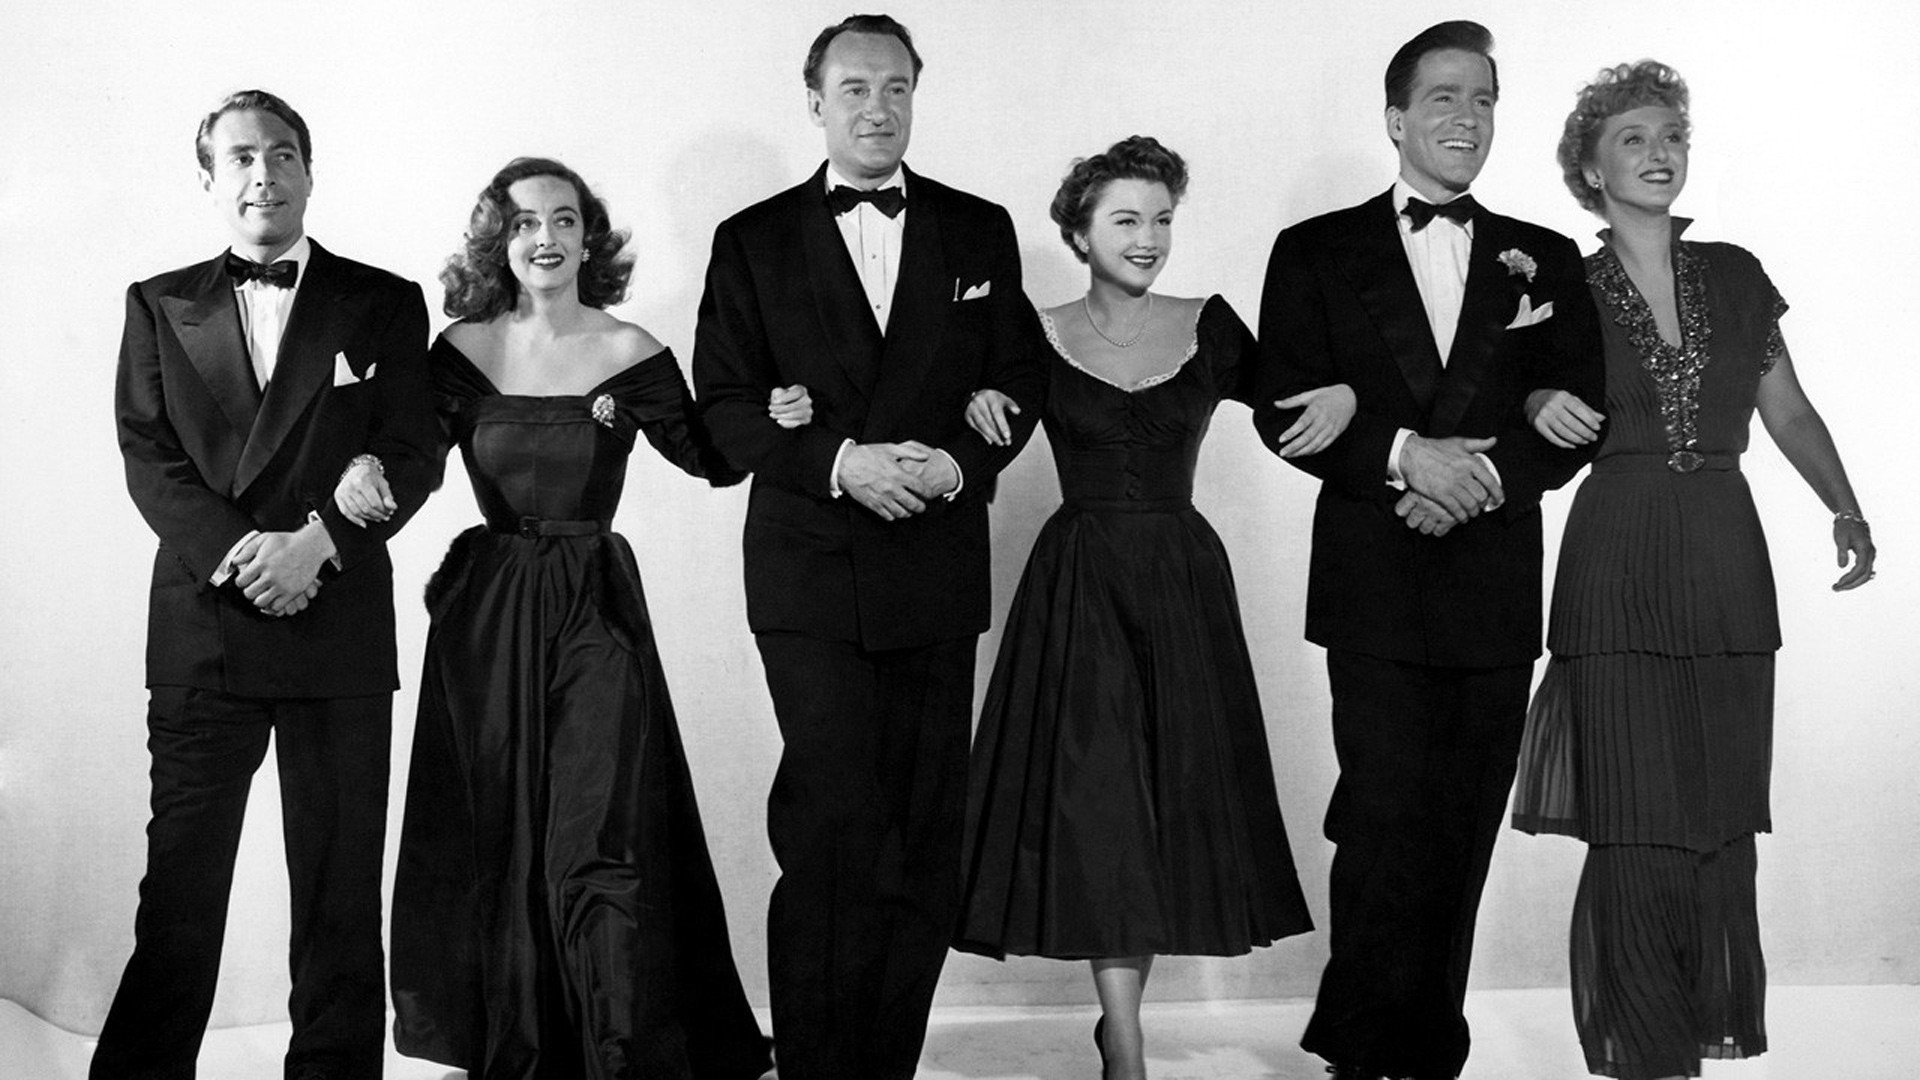 All About Eve: Behind The Scenes Documentary On Bette Davis' Best Role